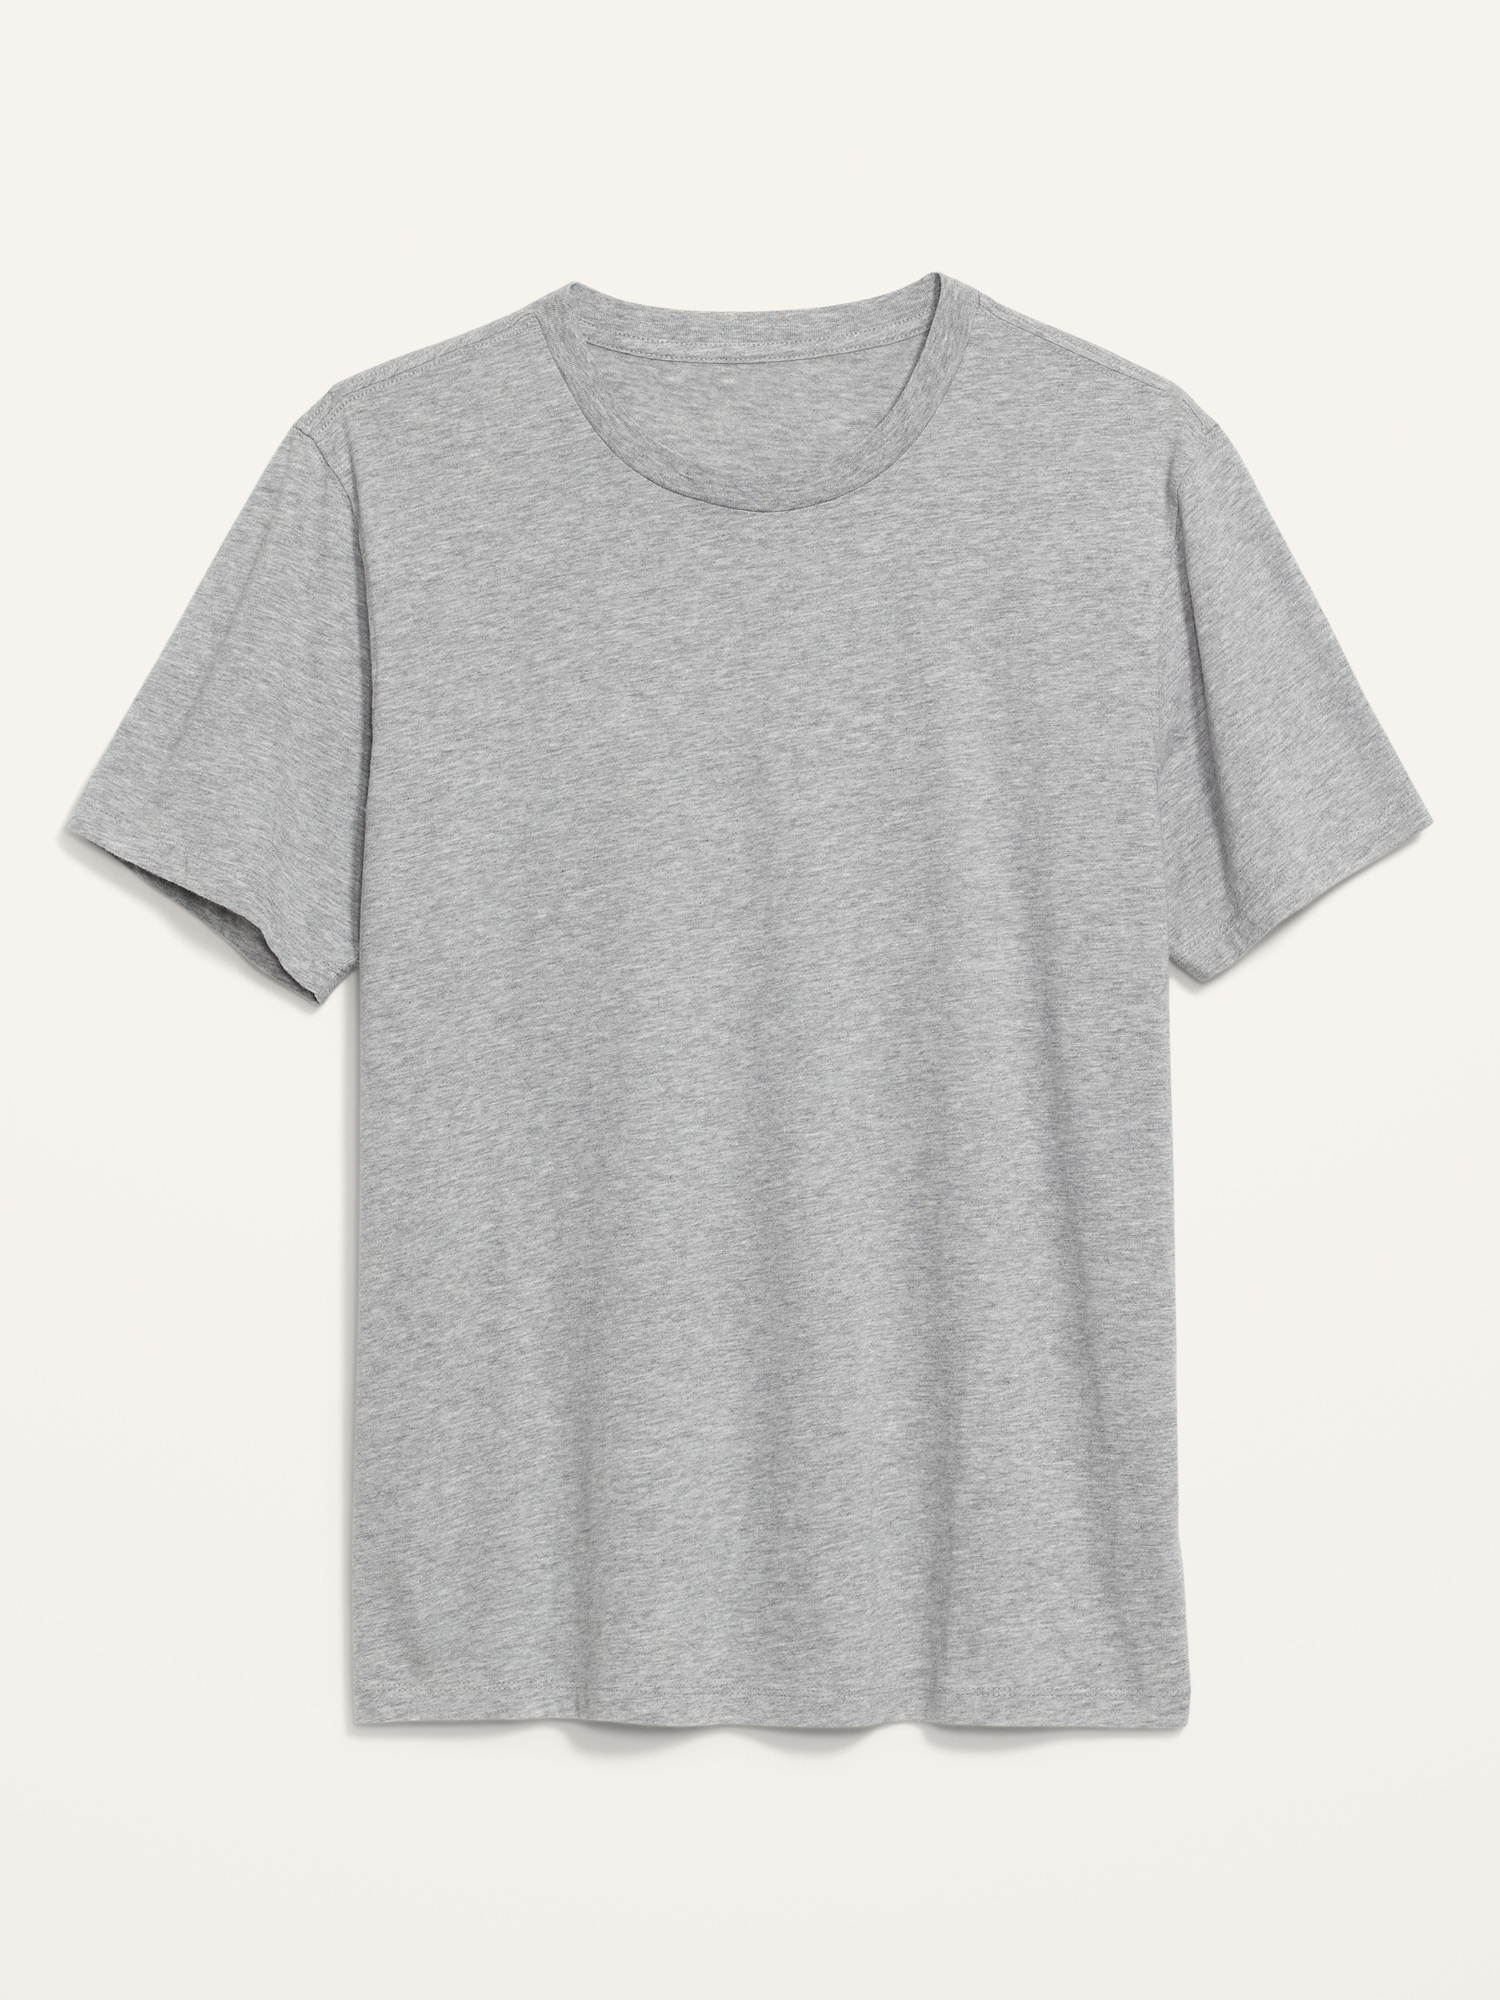 Old Navy Soft-Washed Crew-Neck T-Shirt for Men gray. 1